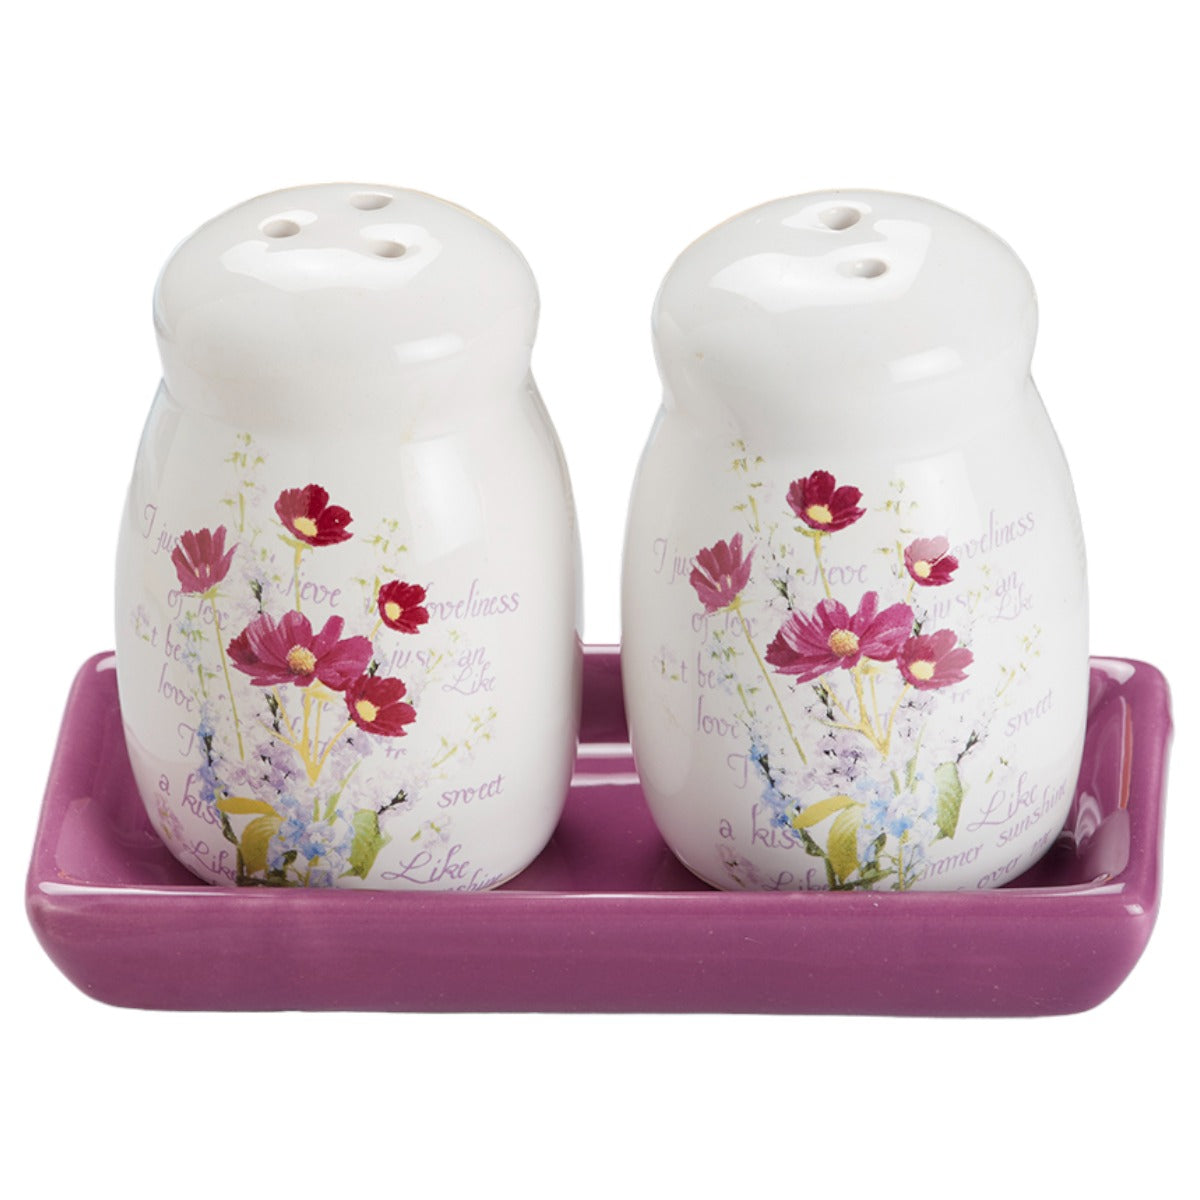 Ceramic Salt and Pepper Set with tray, Printed Design, White (8592)